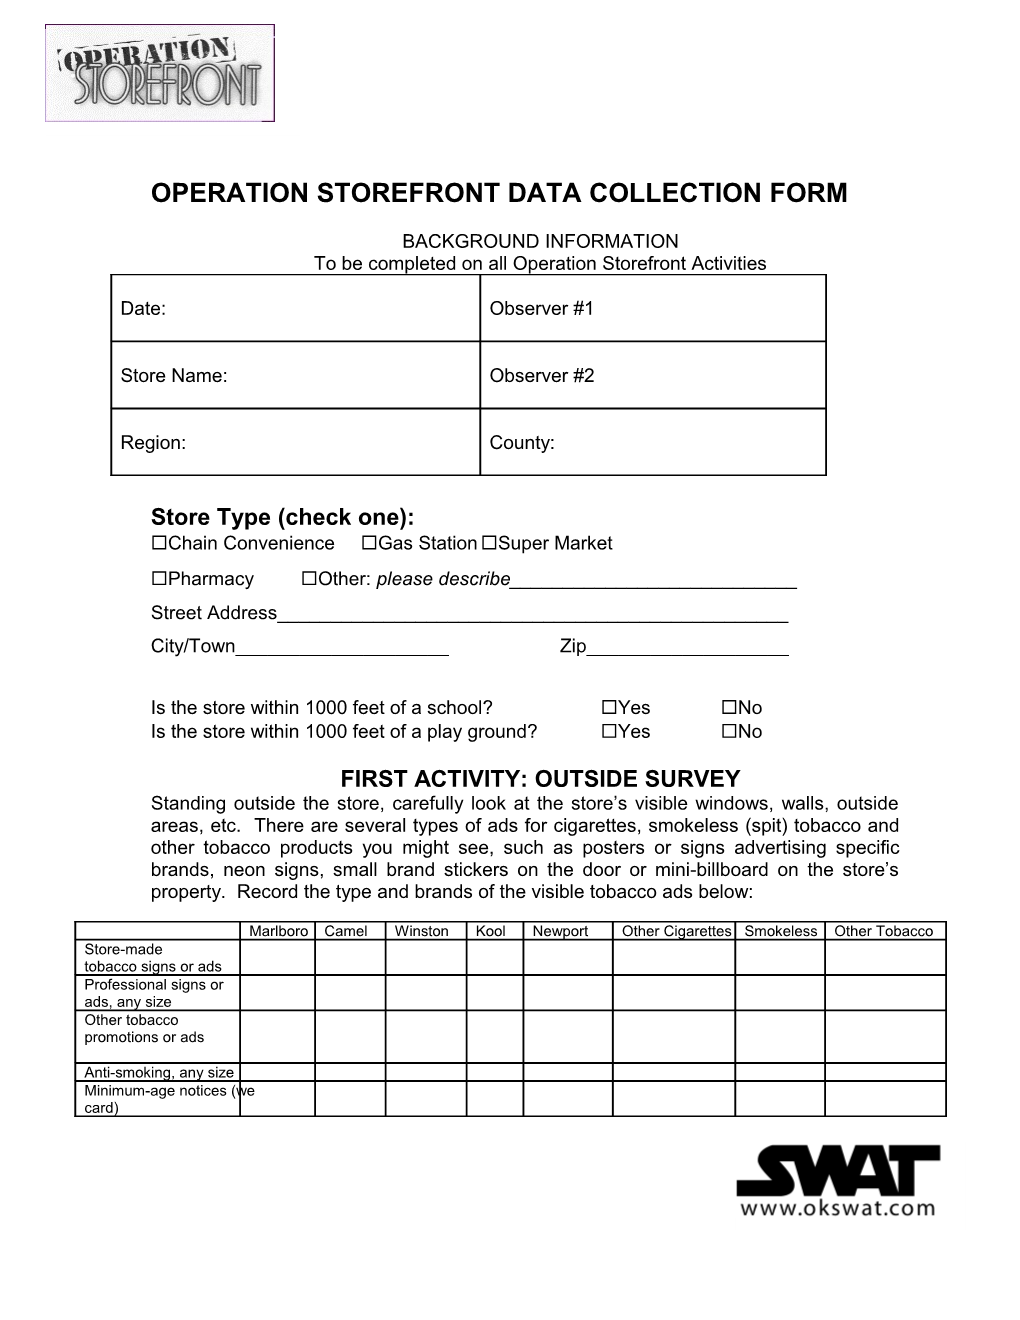 Operation Storefront Data Collection Form